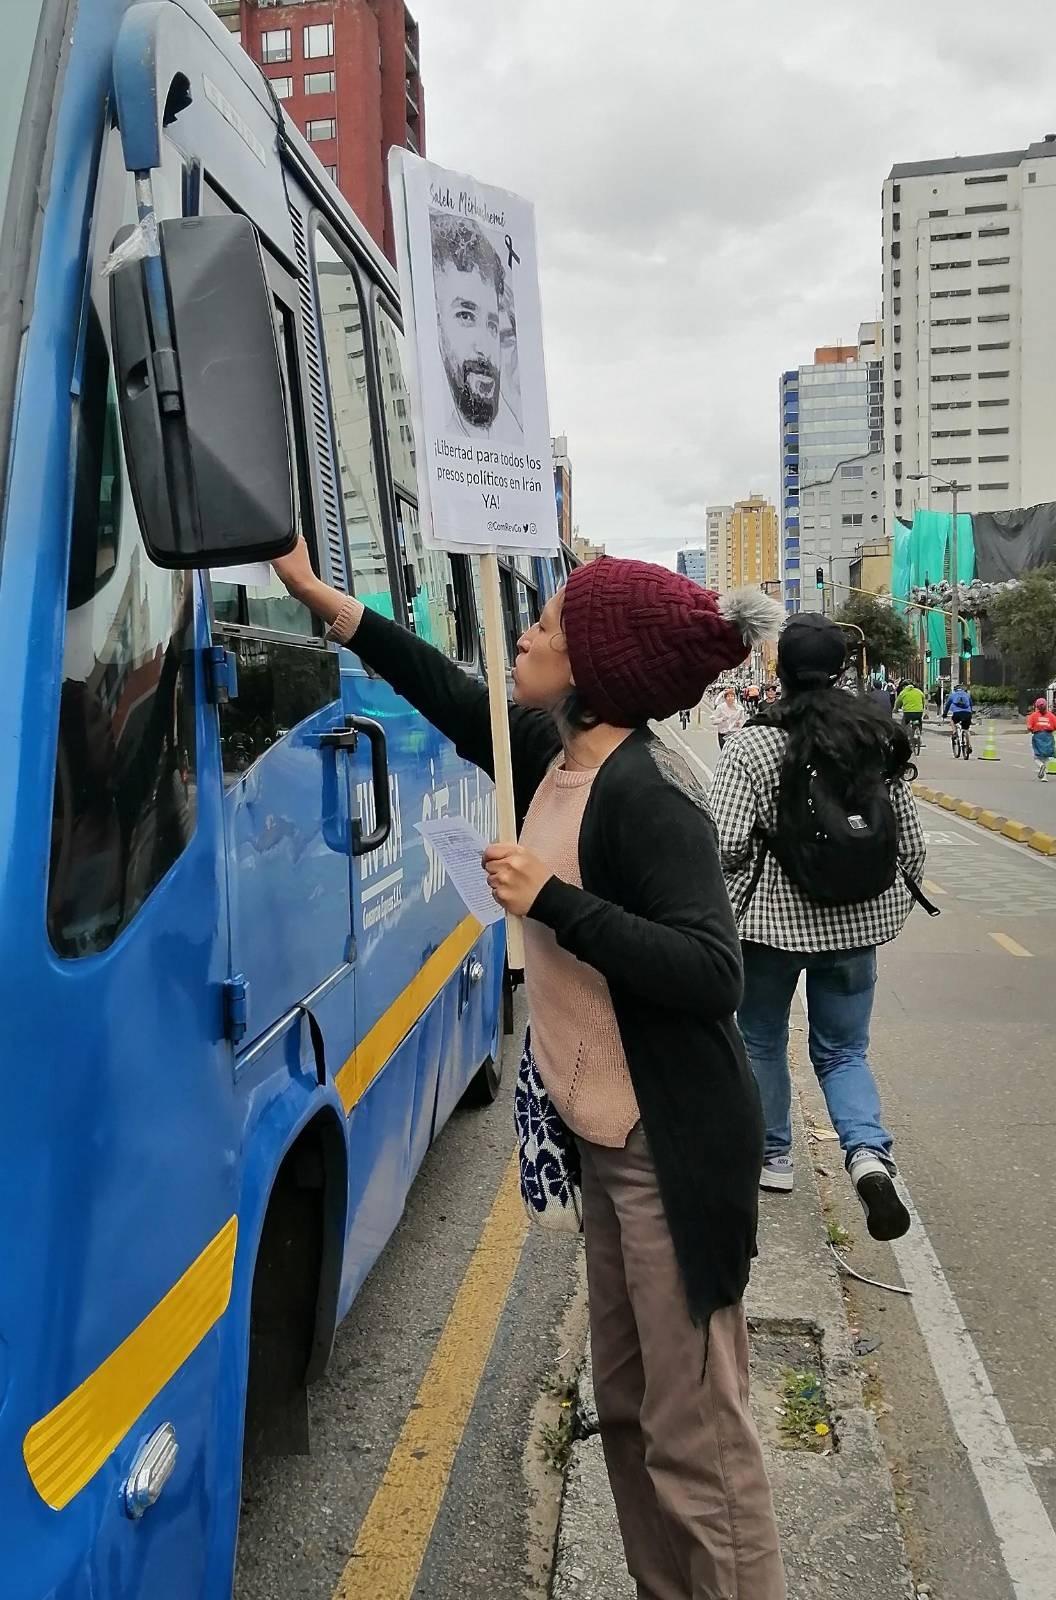 Bogota, Colombia, leafletting bus to stop executions in Iran